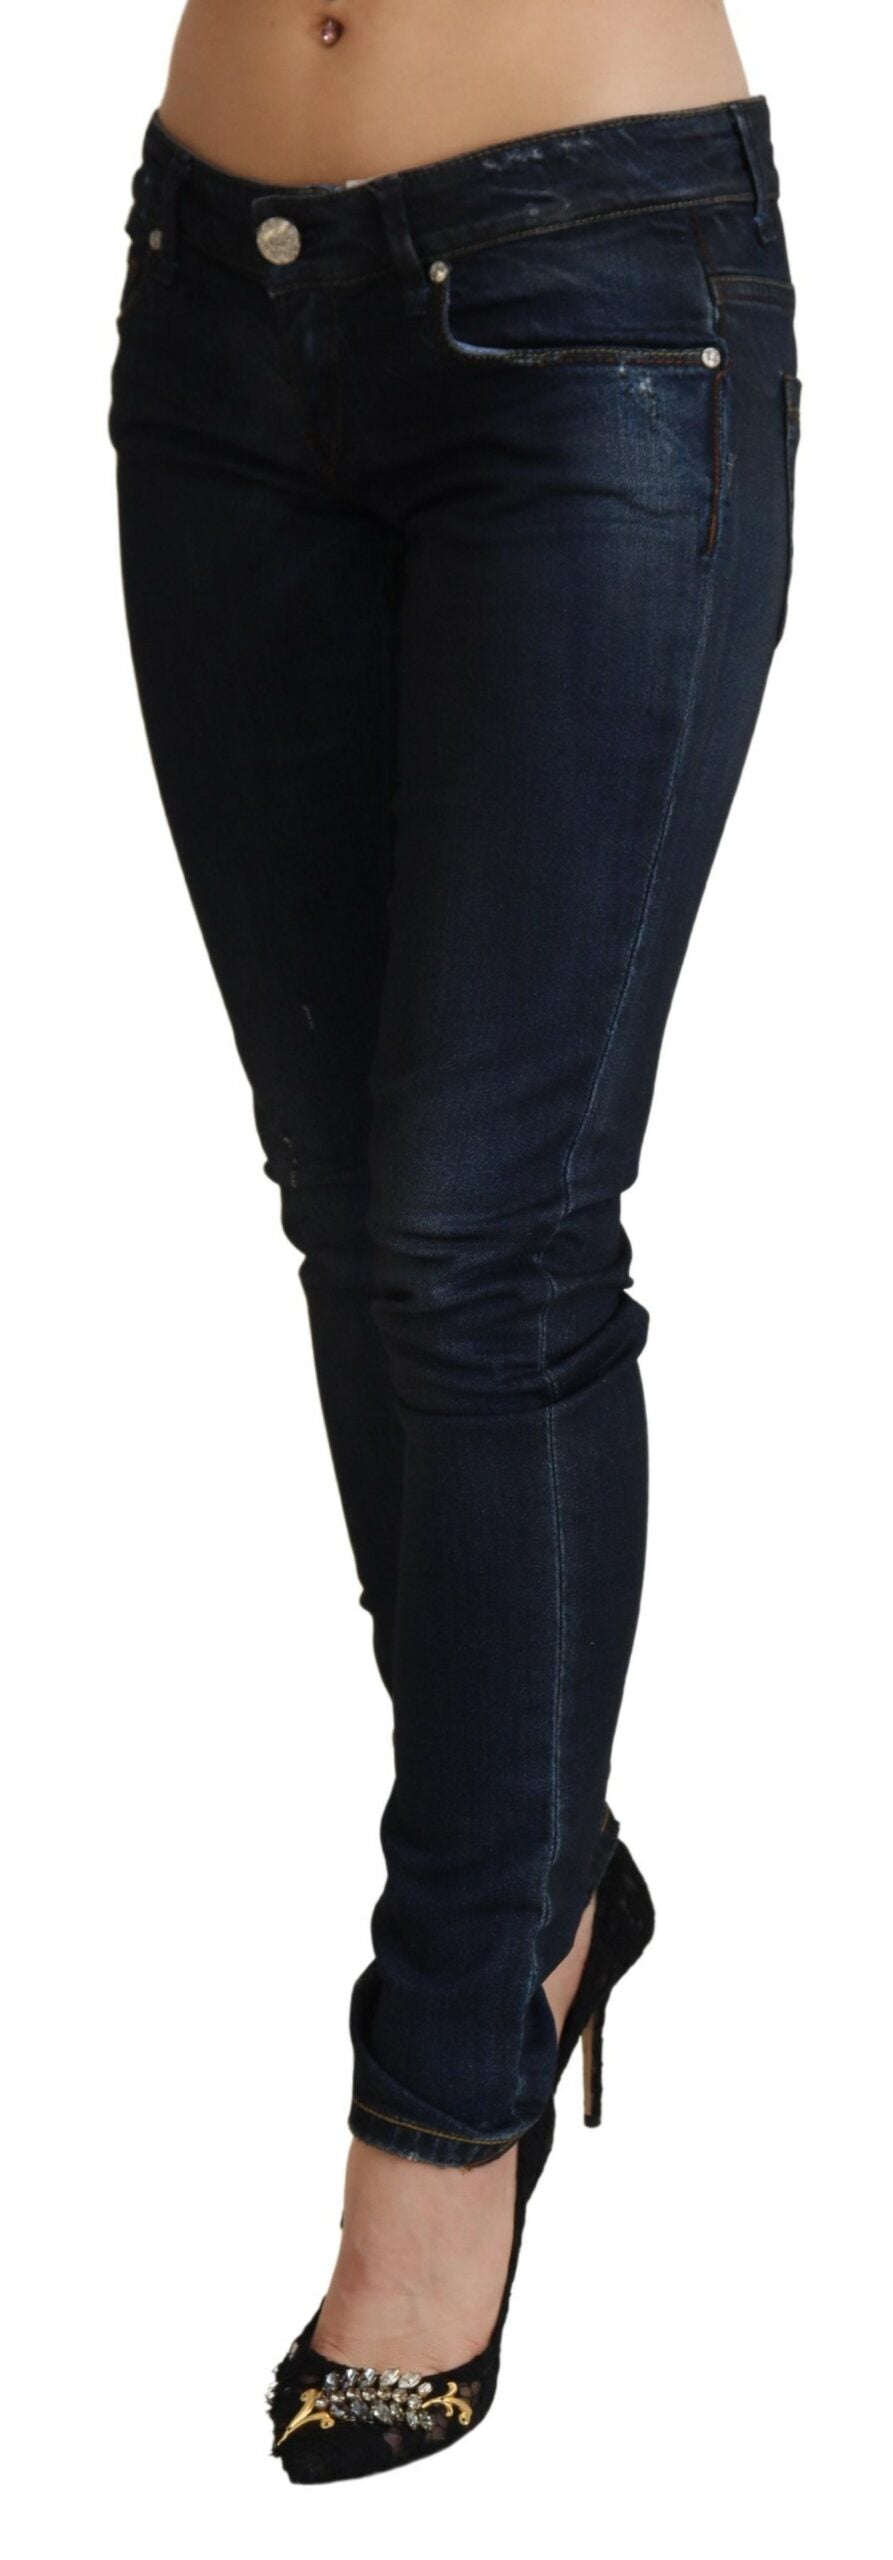 Blue Low Waist Slim Fit Women Denim Jeans - Designed by Acht Available to Buy at a Discounted Price on Moon Behind The Hill Online Designer Discount Store